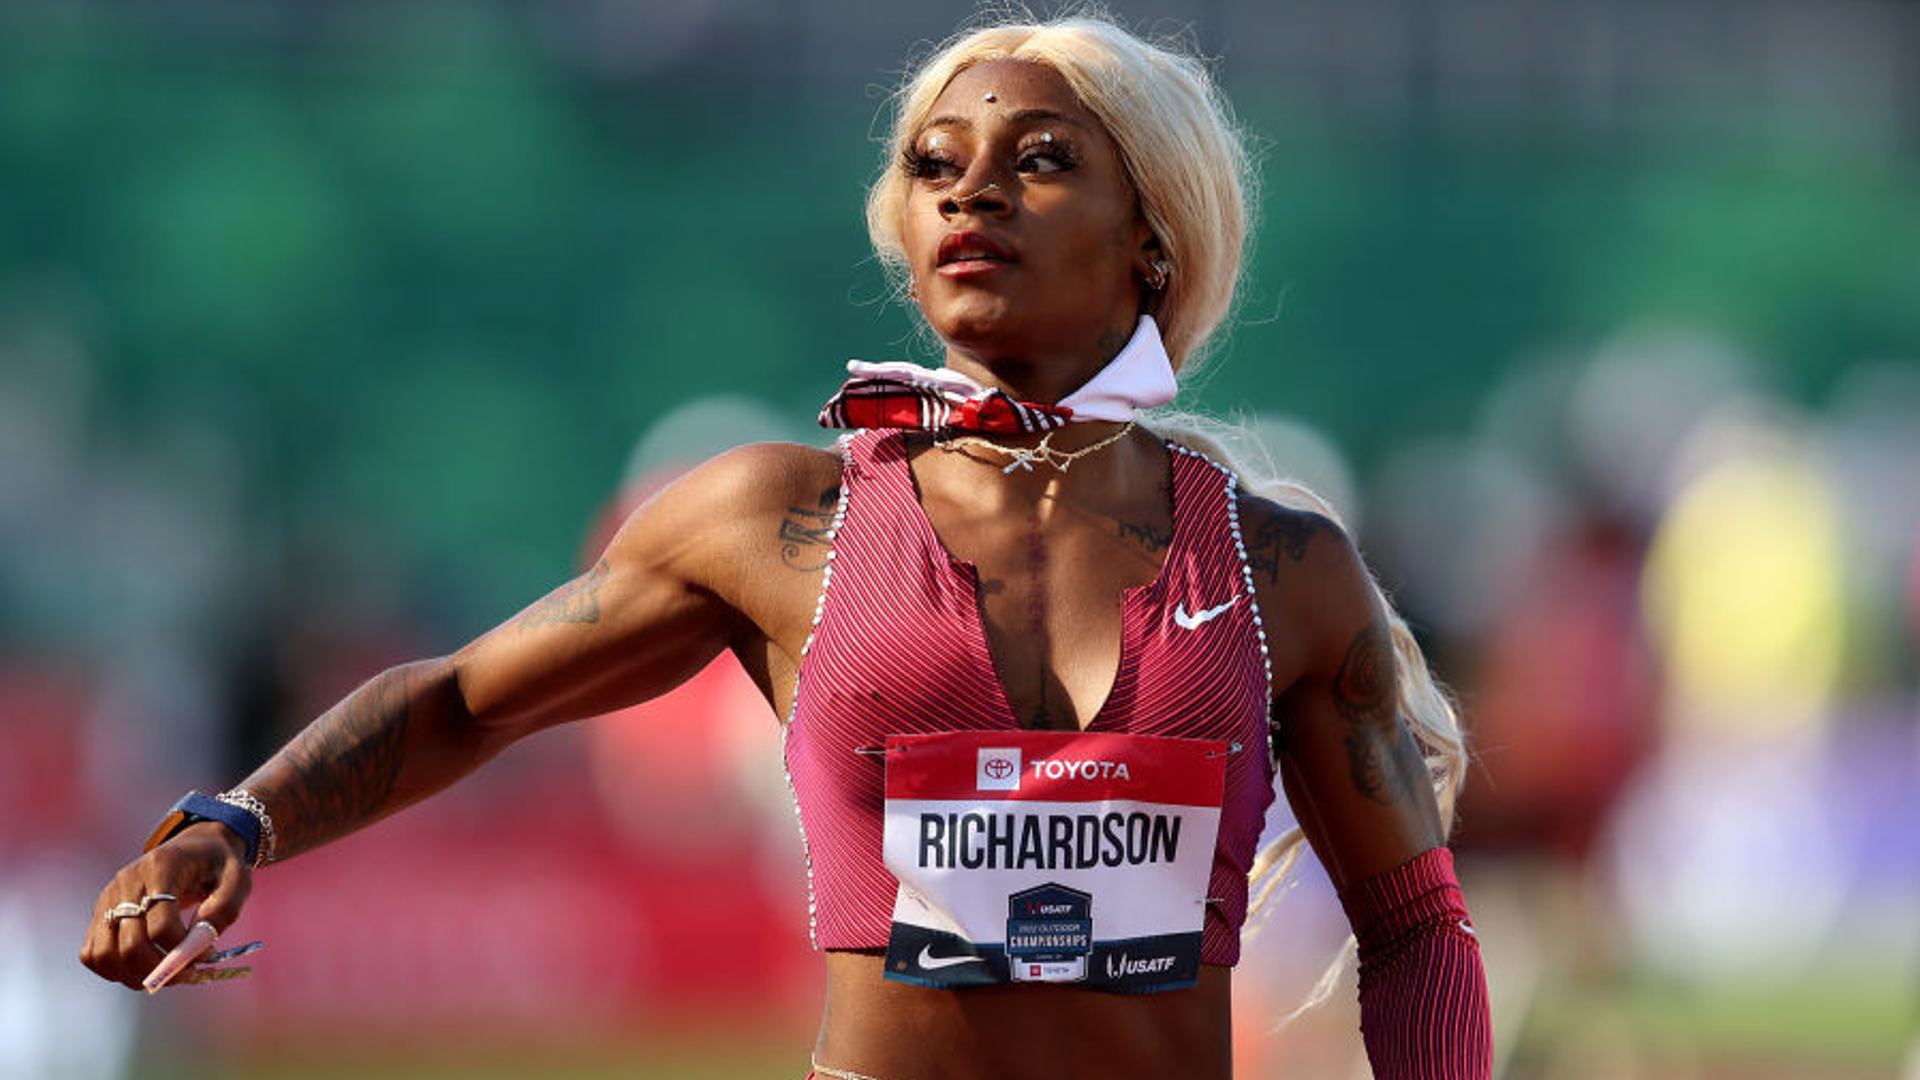 Sha'Carri Richardson in action at the USA Track & Field championships 2022 (Richardson in a file photo; Image Credits - Insidethe games)